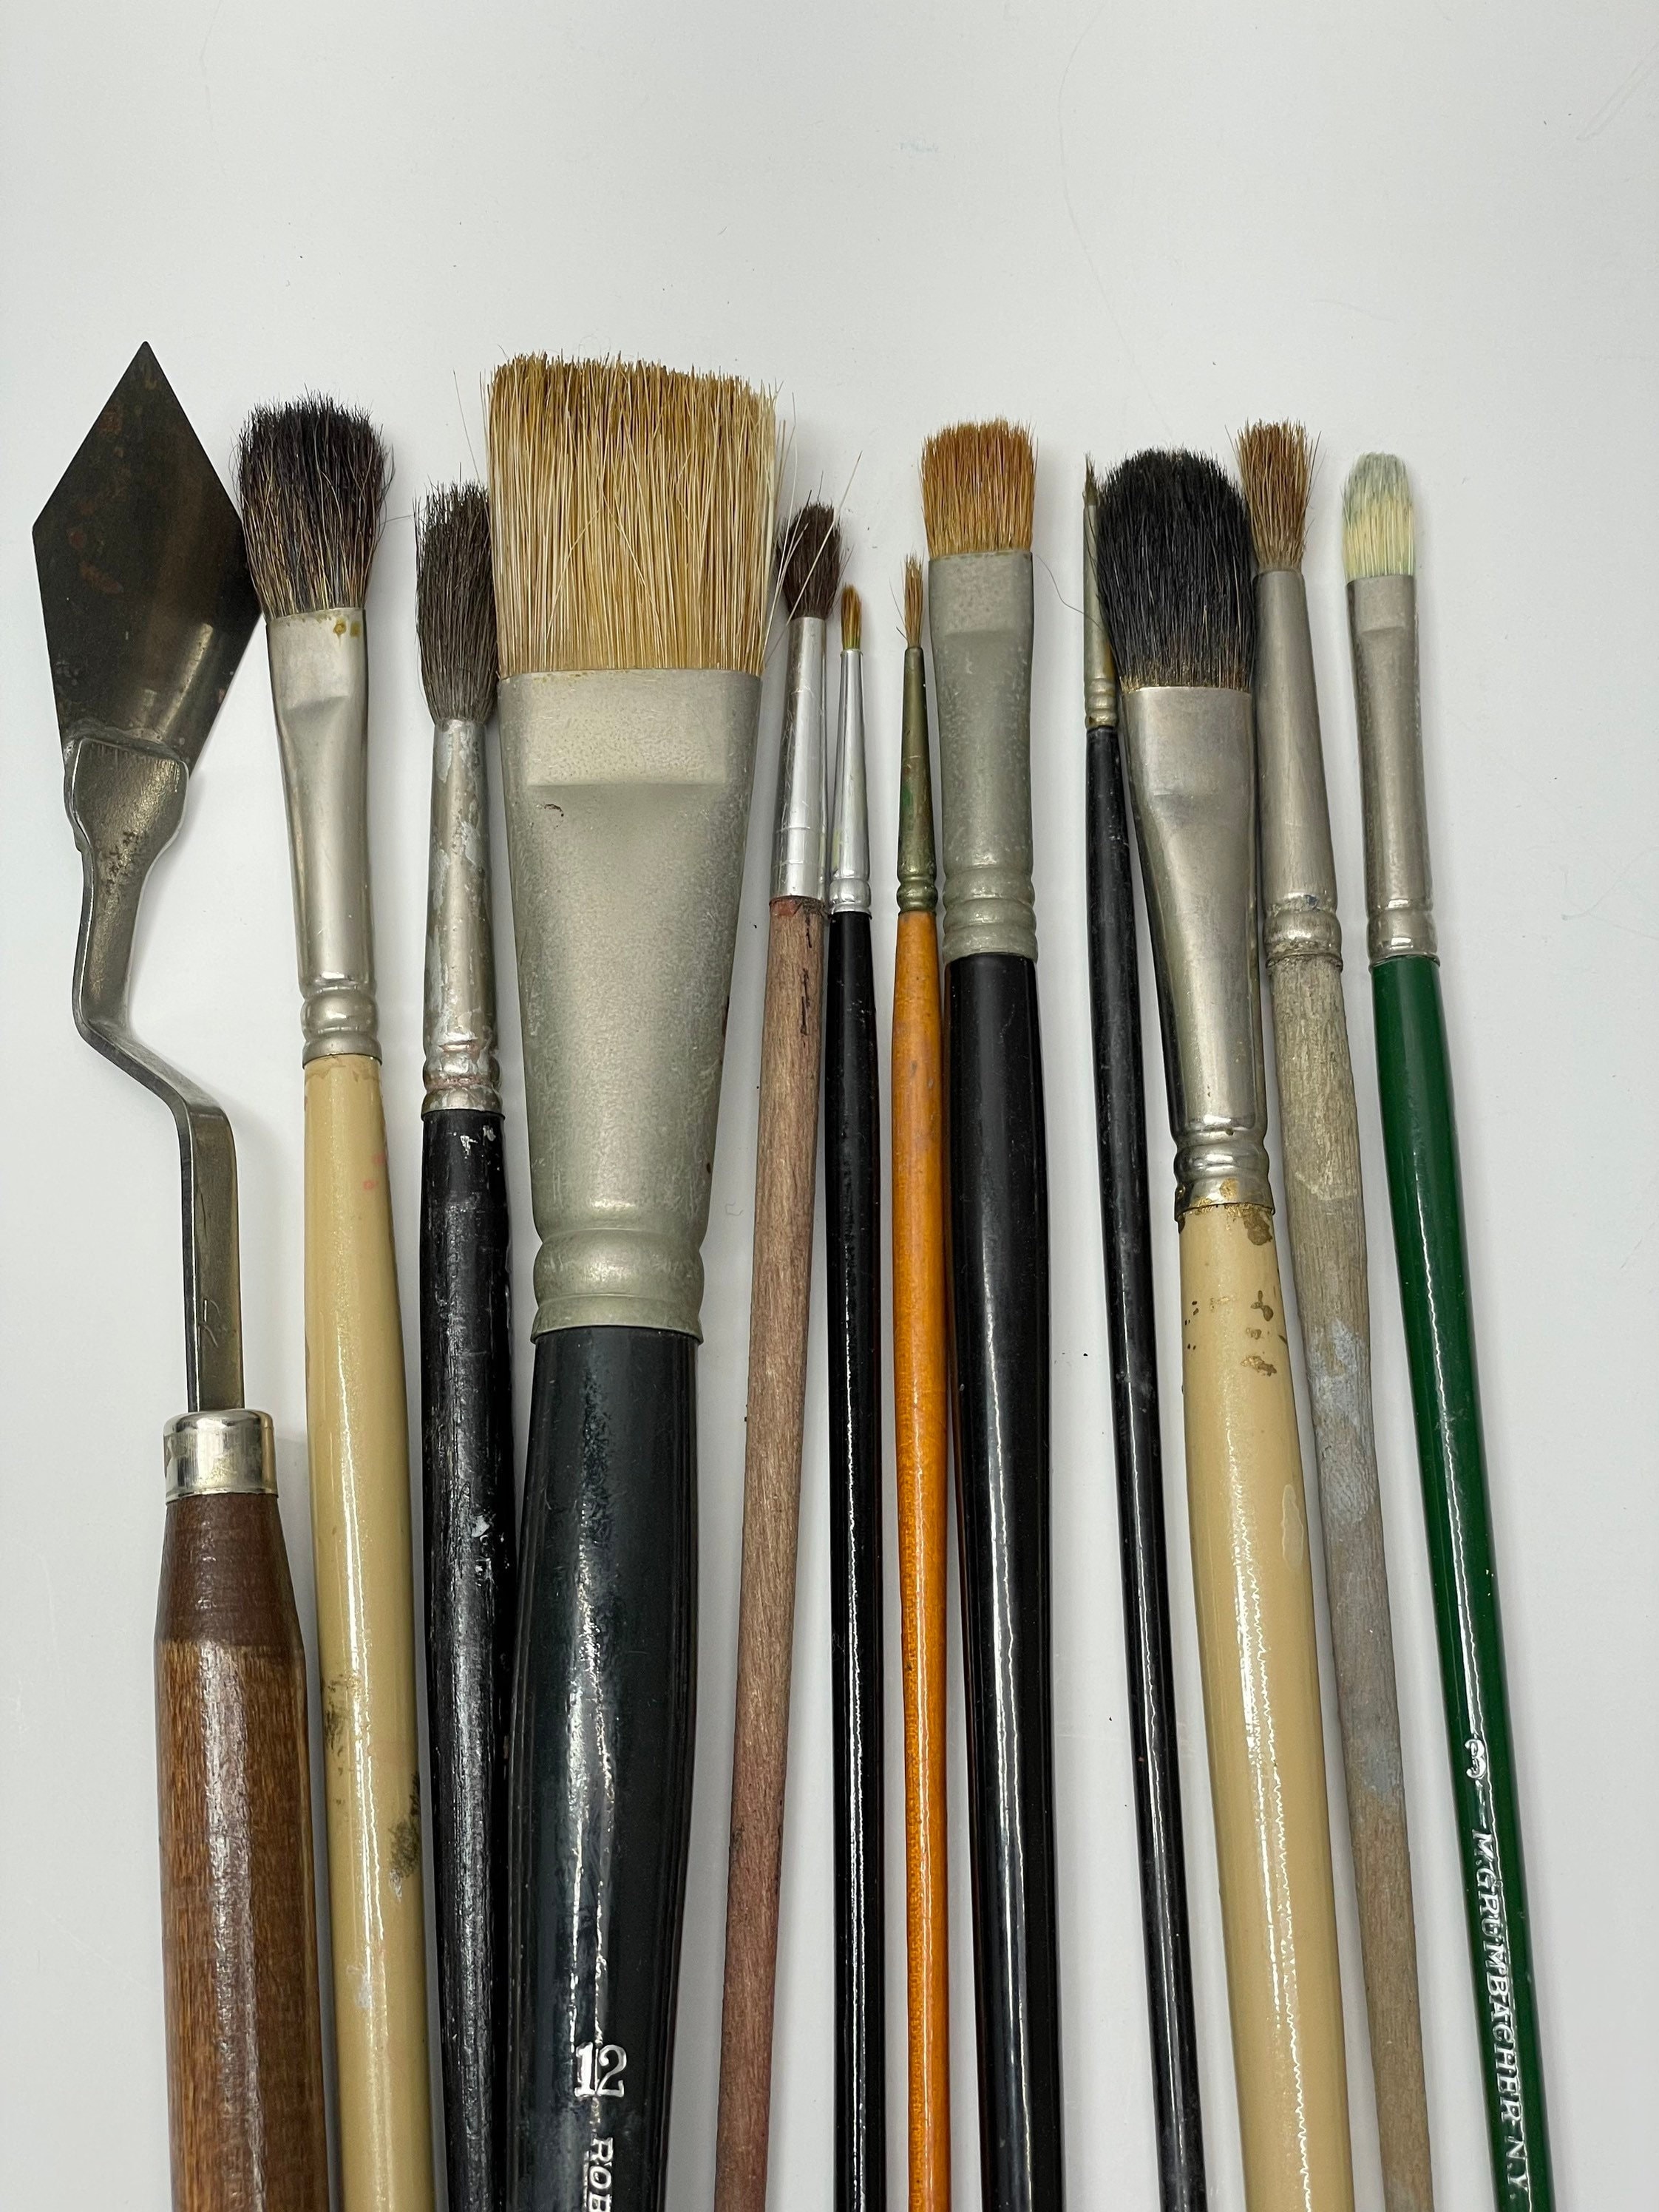 32 Paint Brushes From 7 Series and 1 Pen Holder 